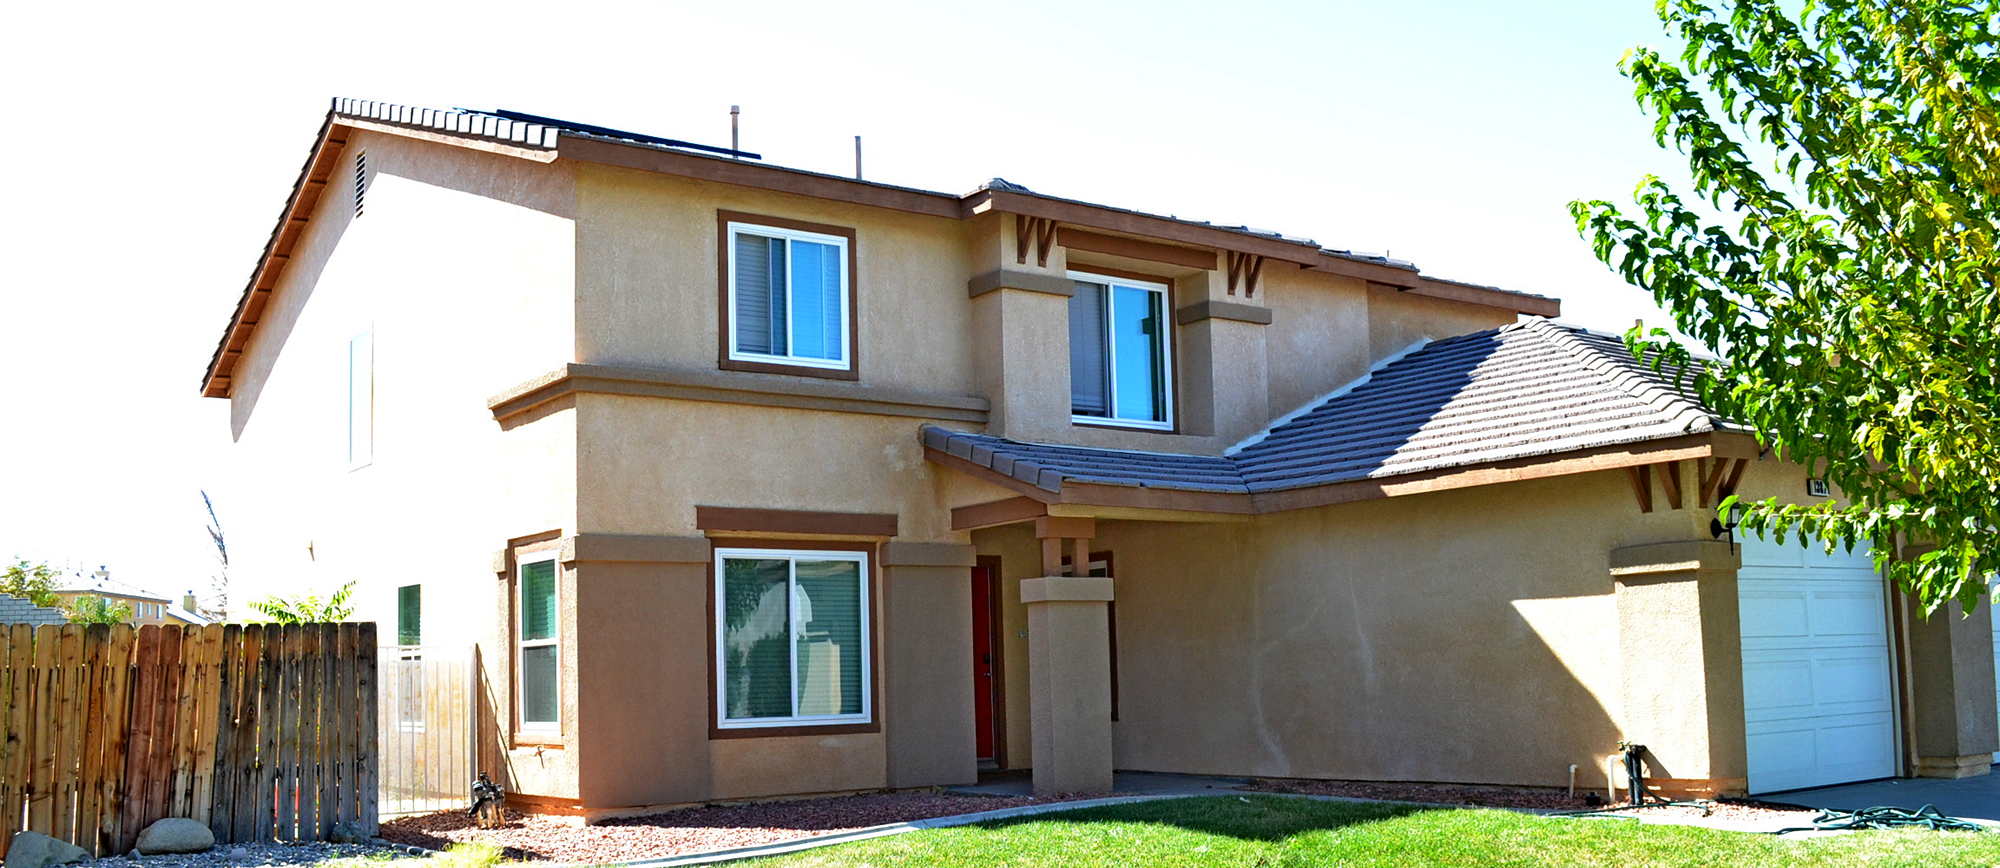 Project: Window Replacement Victorville